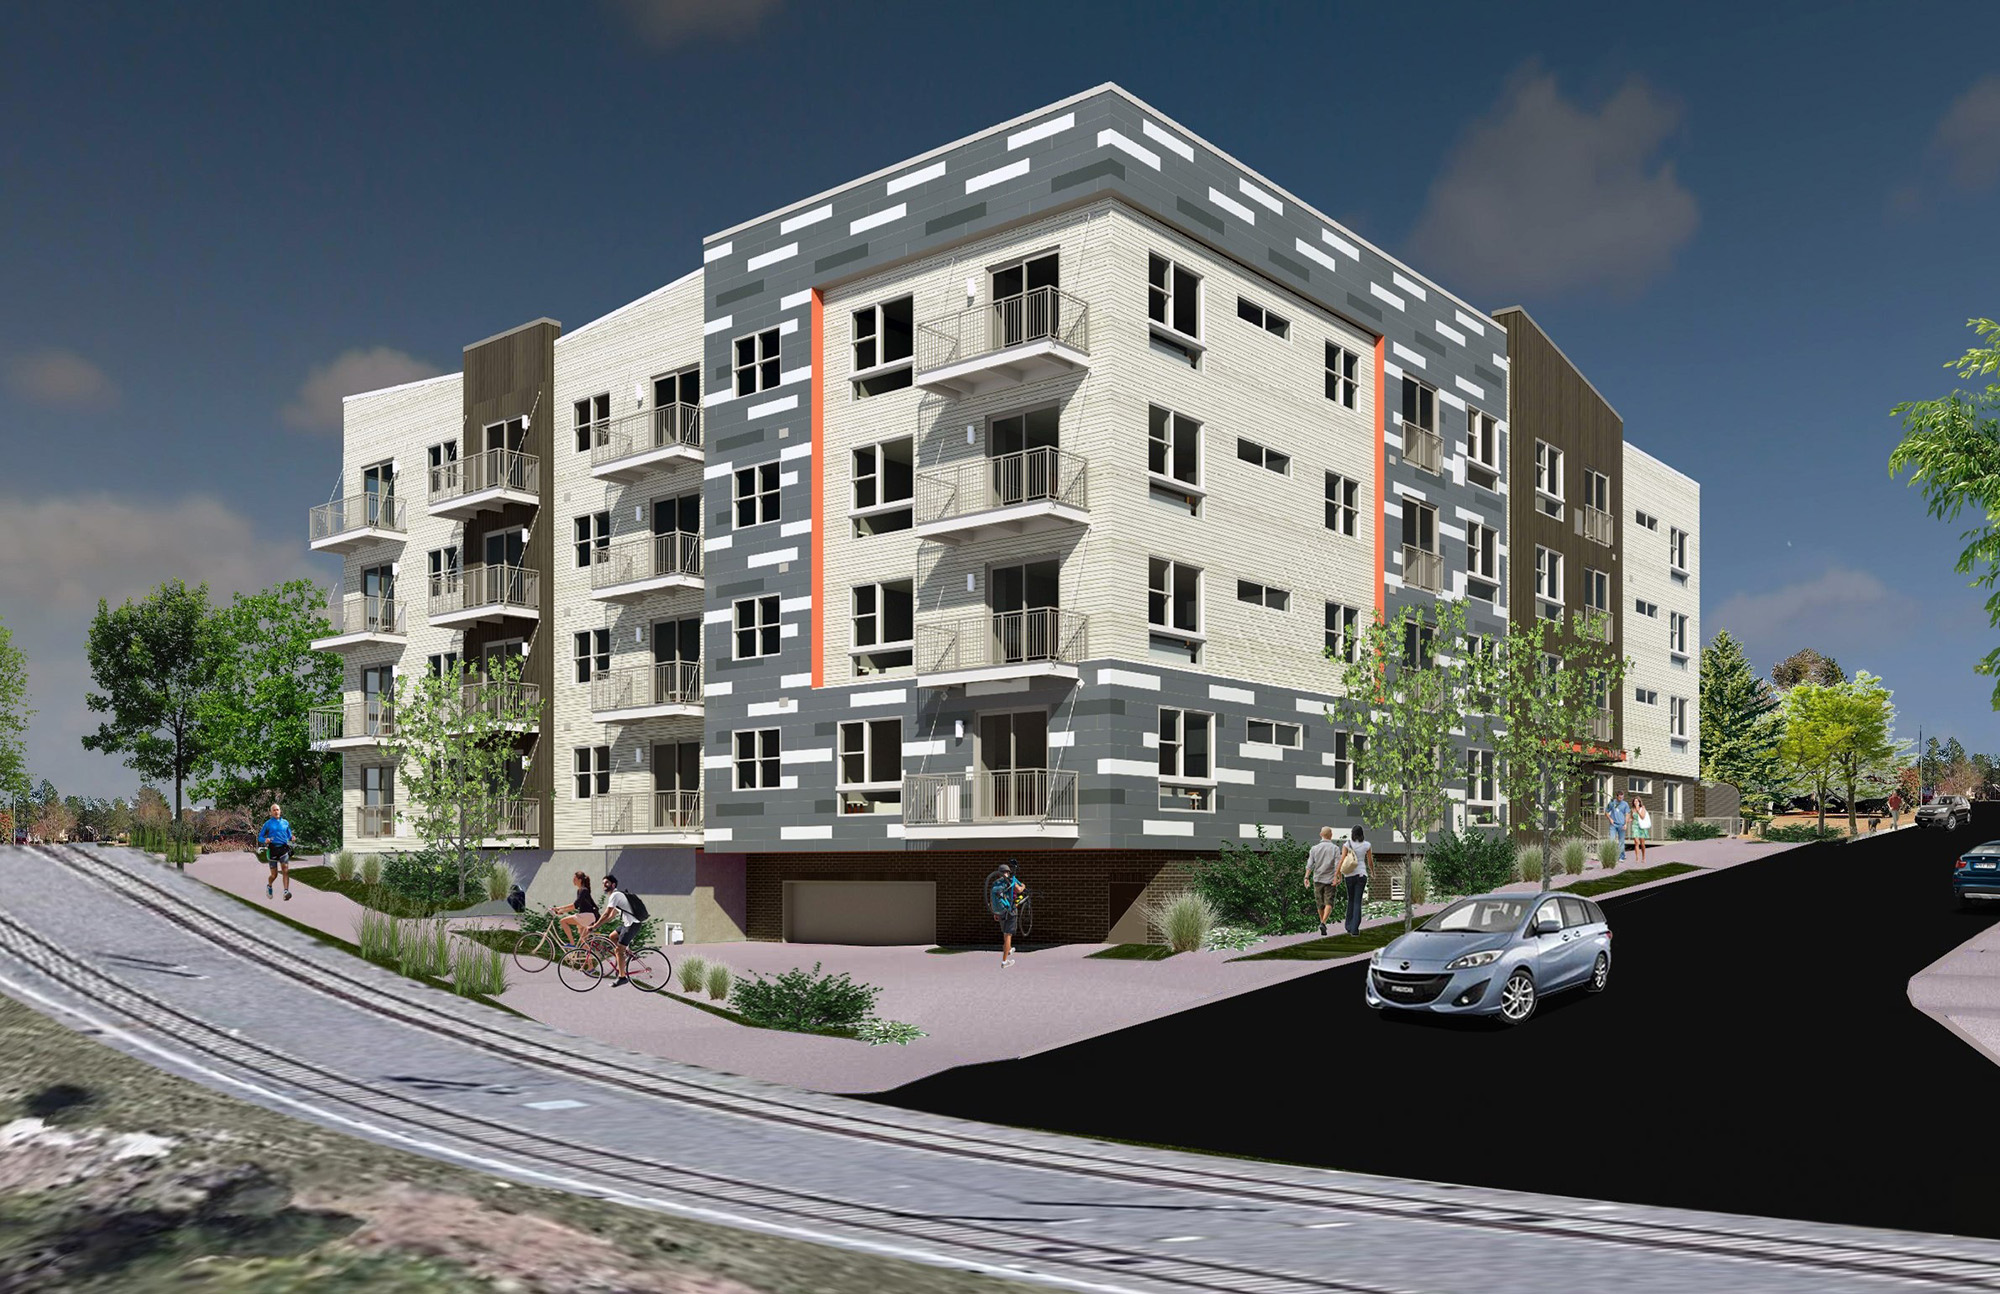 rendering of 4 storey building at 12th and benton along the light rail corridor